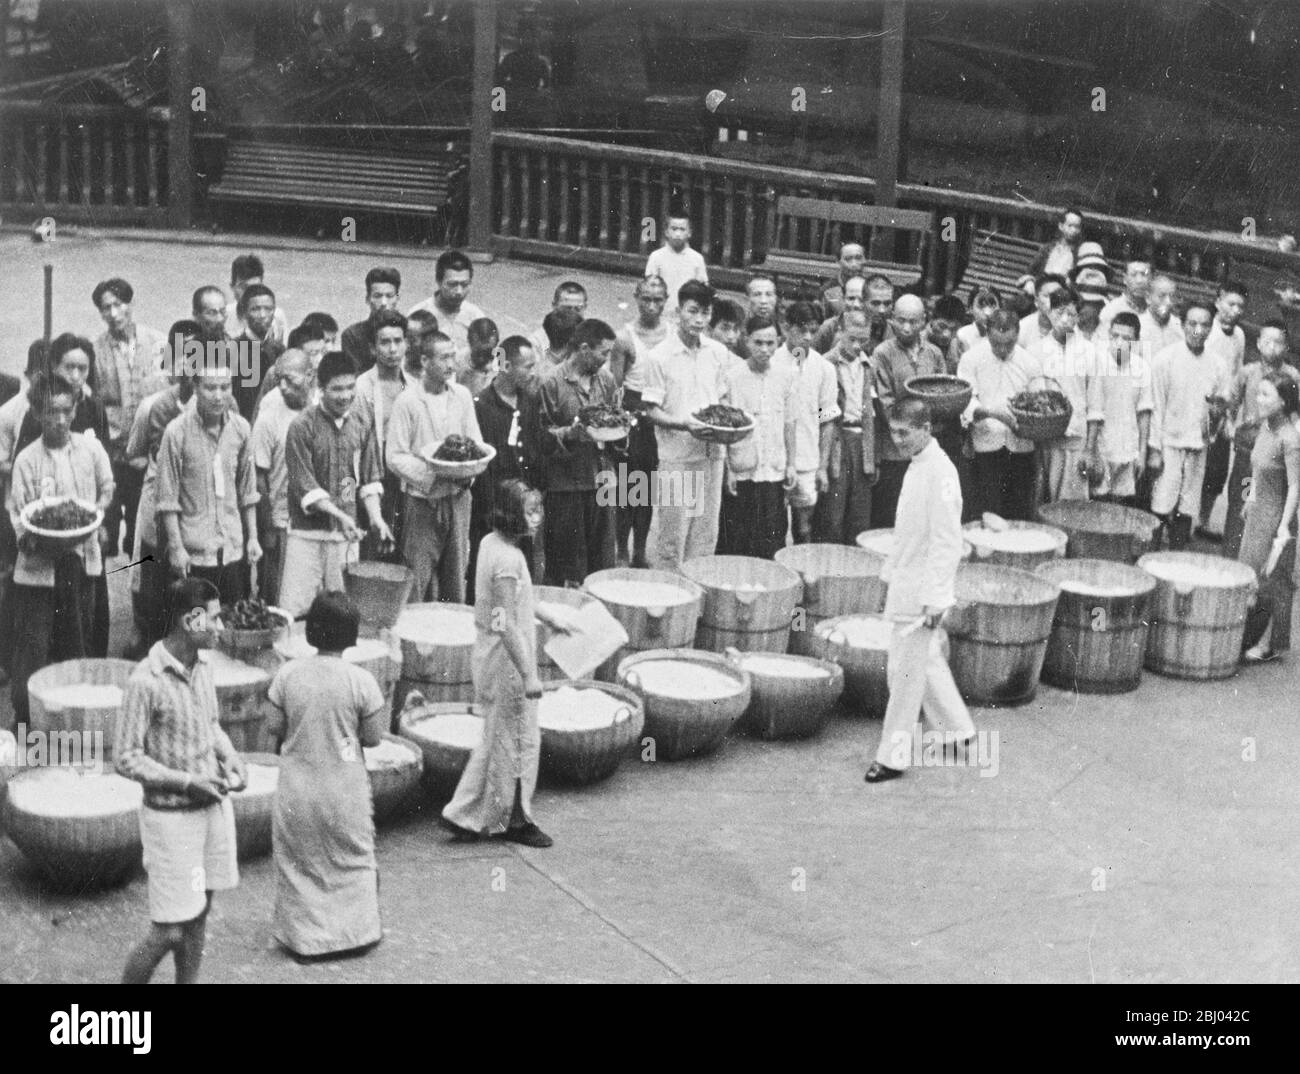 Food for war victims. - An array of large bowls filled with food which gladdened the eyes of hungry Chinese refugees awaiting their rations in Shanghai. - 25 November 1937 Stock Photo